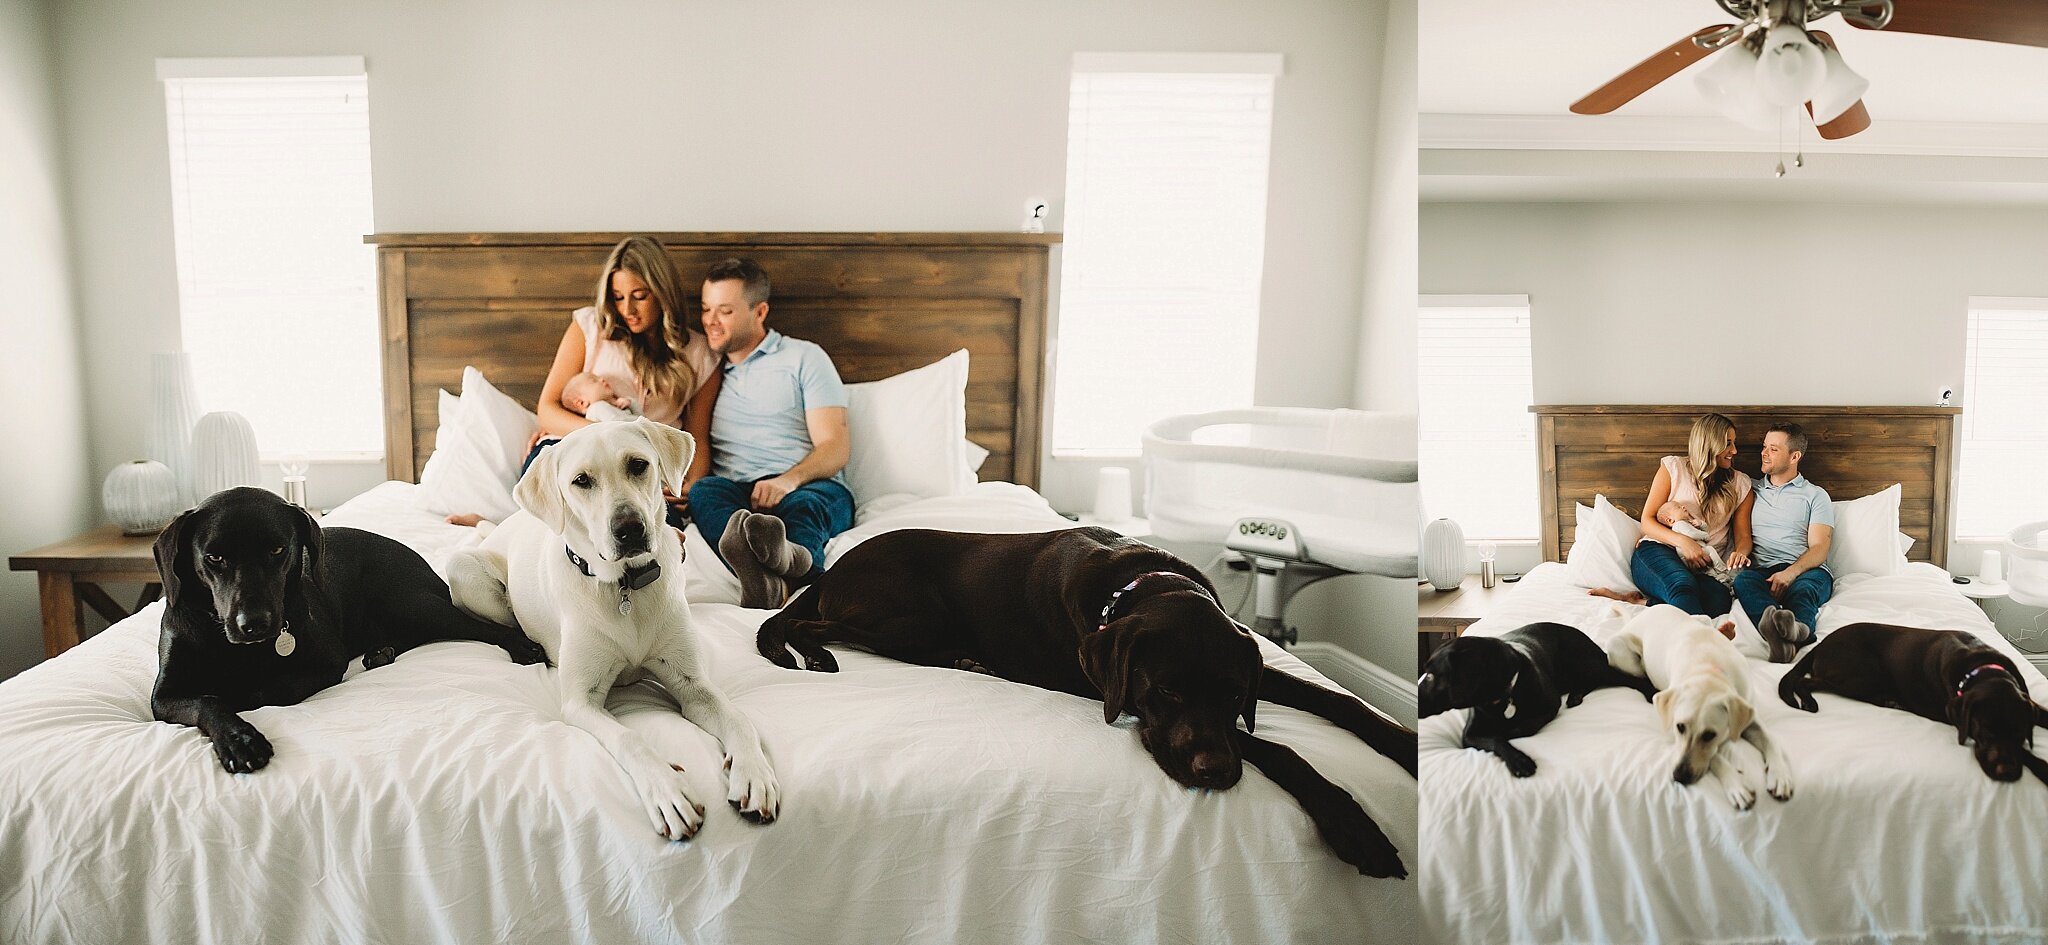 newborn and family photos with dogs, clearwater fl 